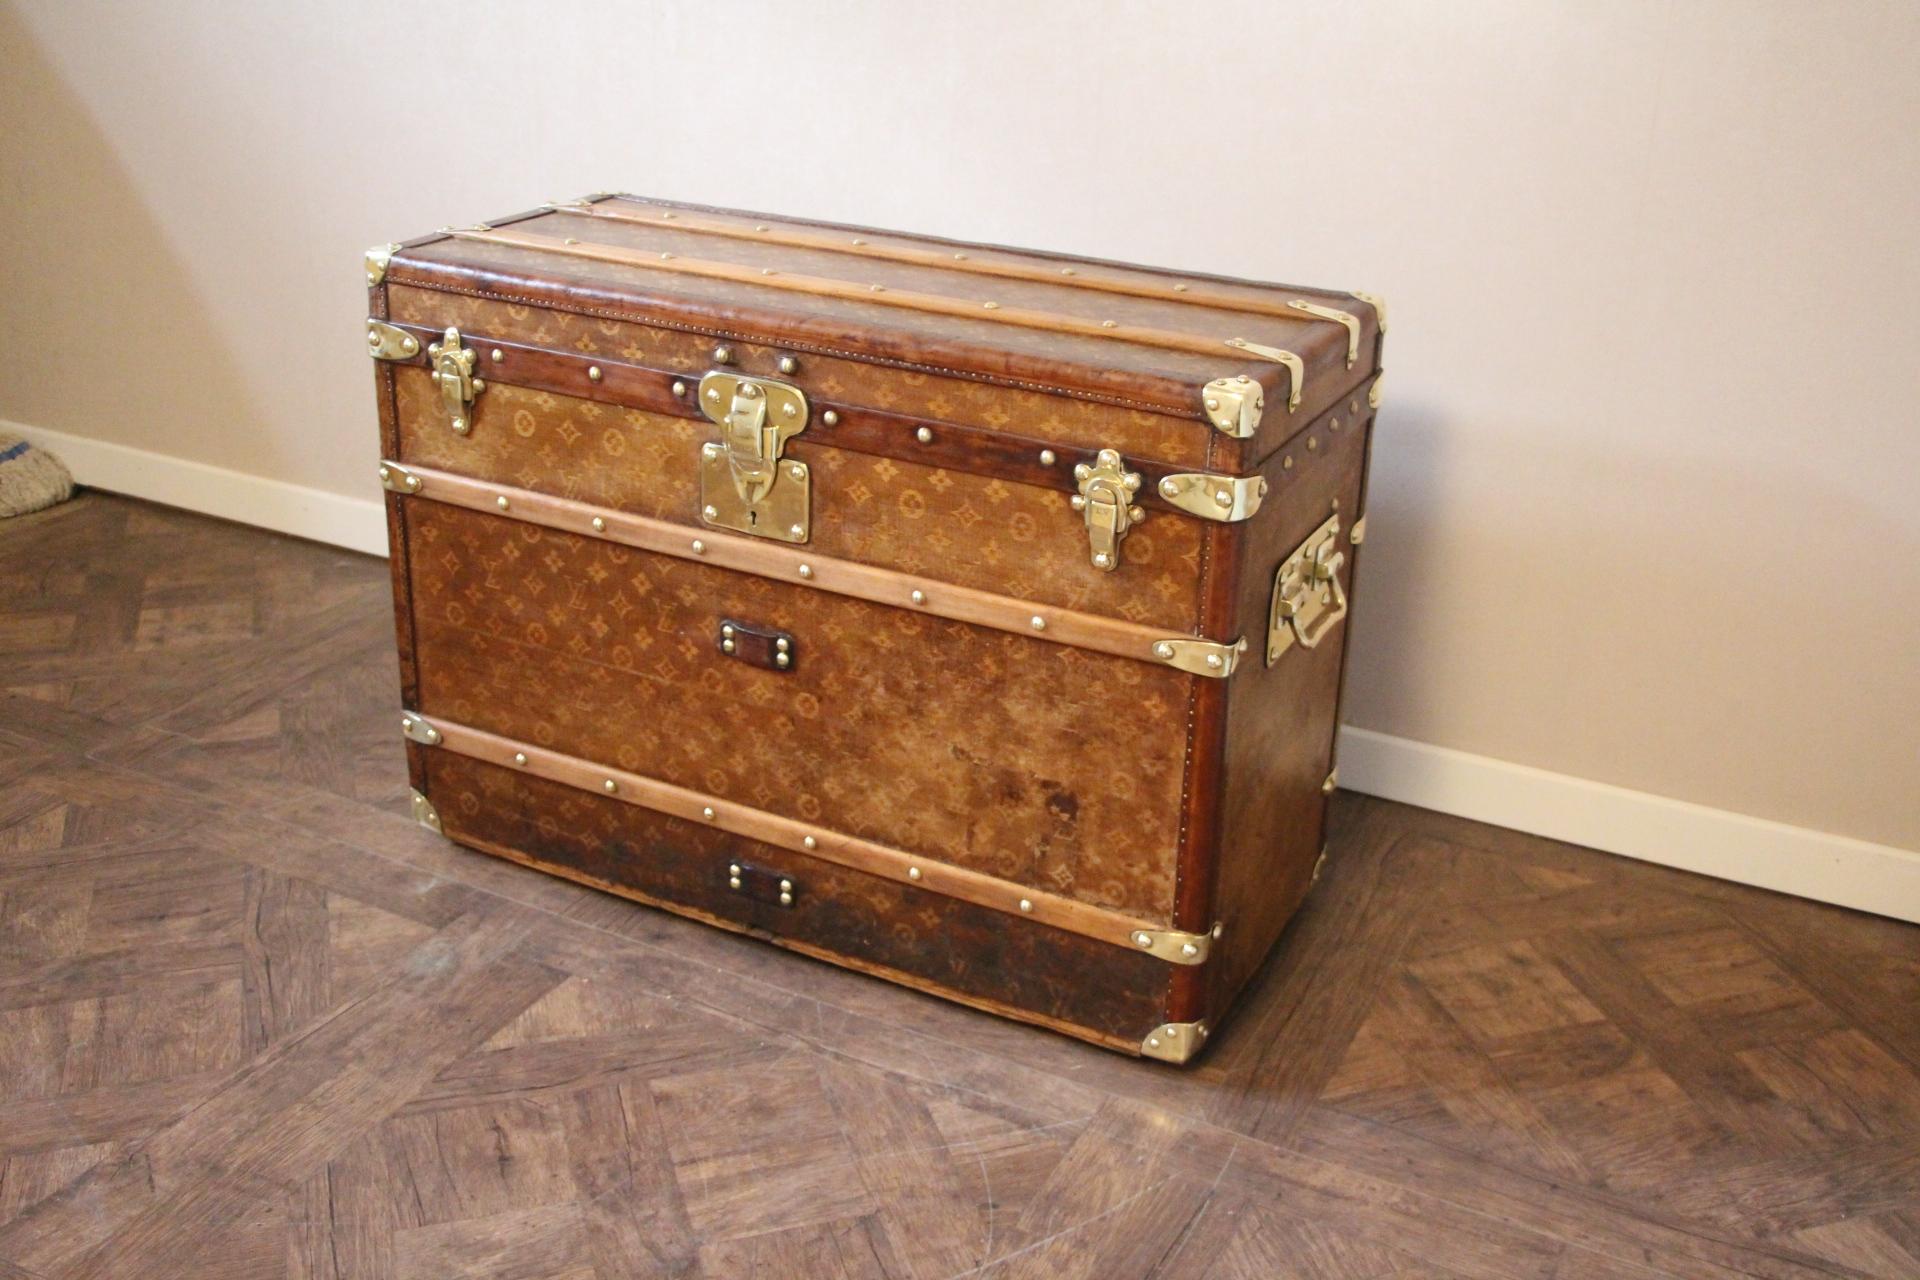 This magnificent Louis Vuitton shoe trunk features the very sought after woven canvas monogram, Louis Vuitton stamped solid brass locks, studs and side handles. It also has got very deep brown all leather trim. It has got a beautiful and warm patina